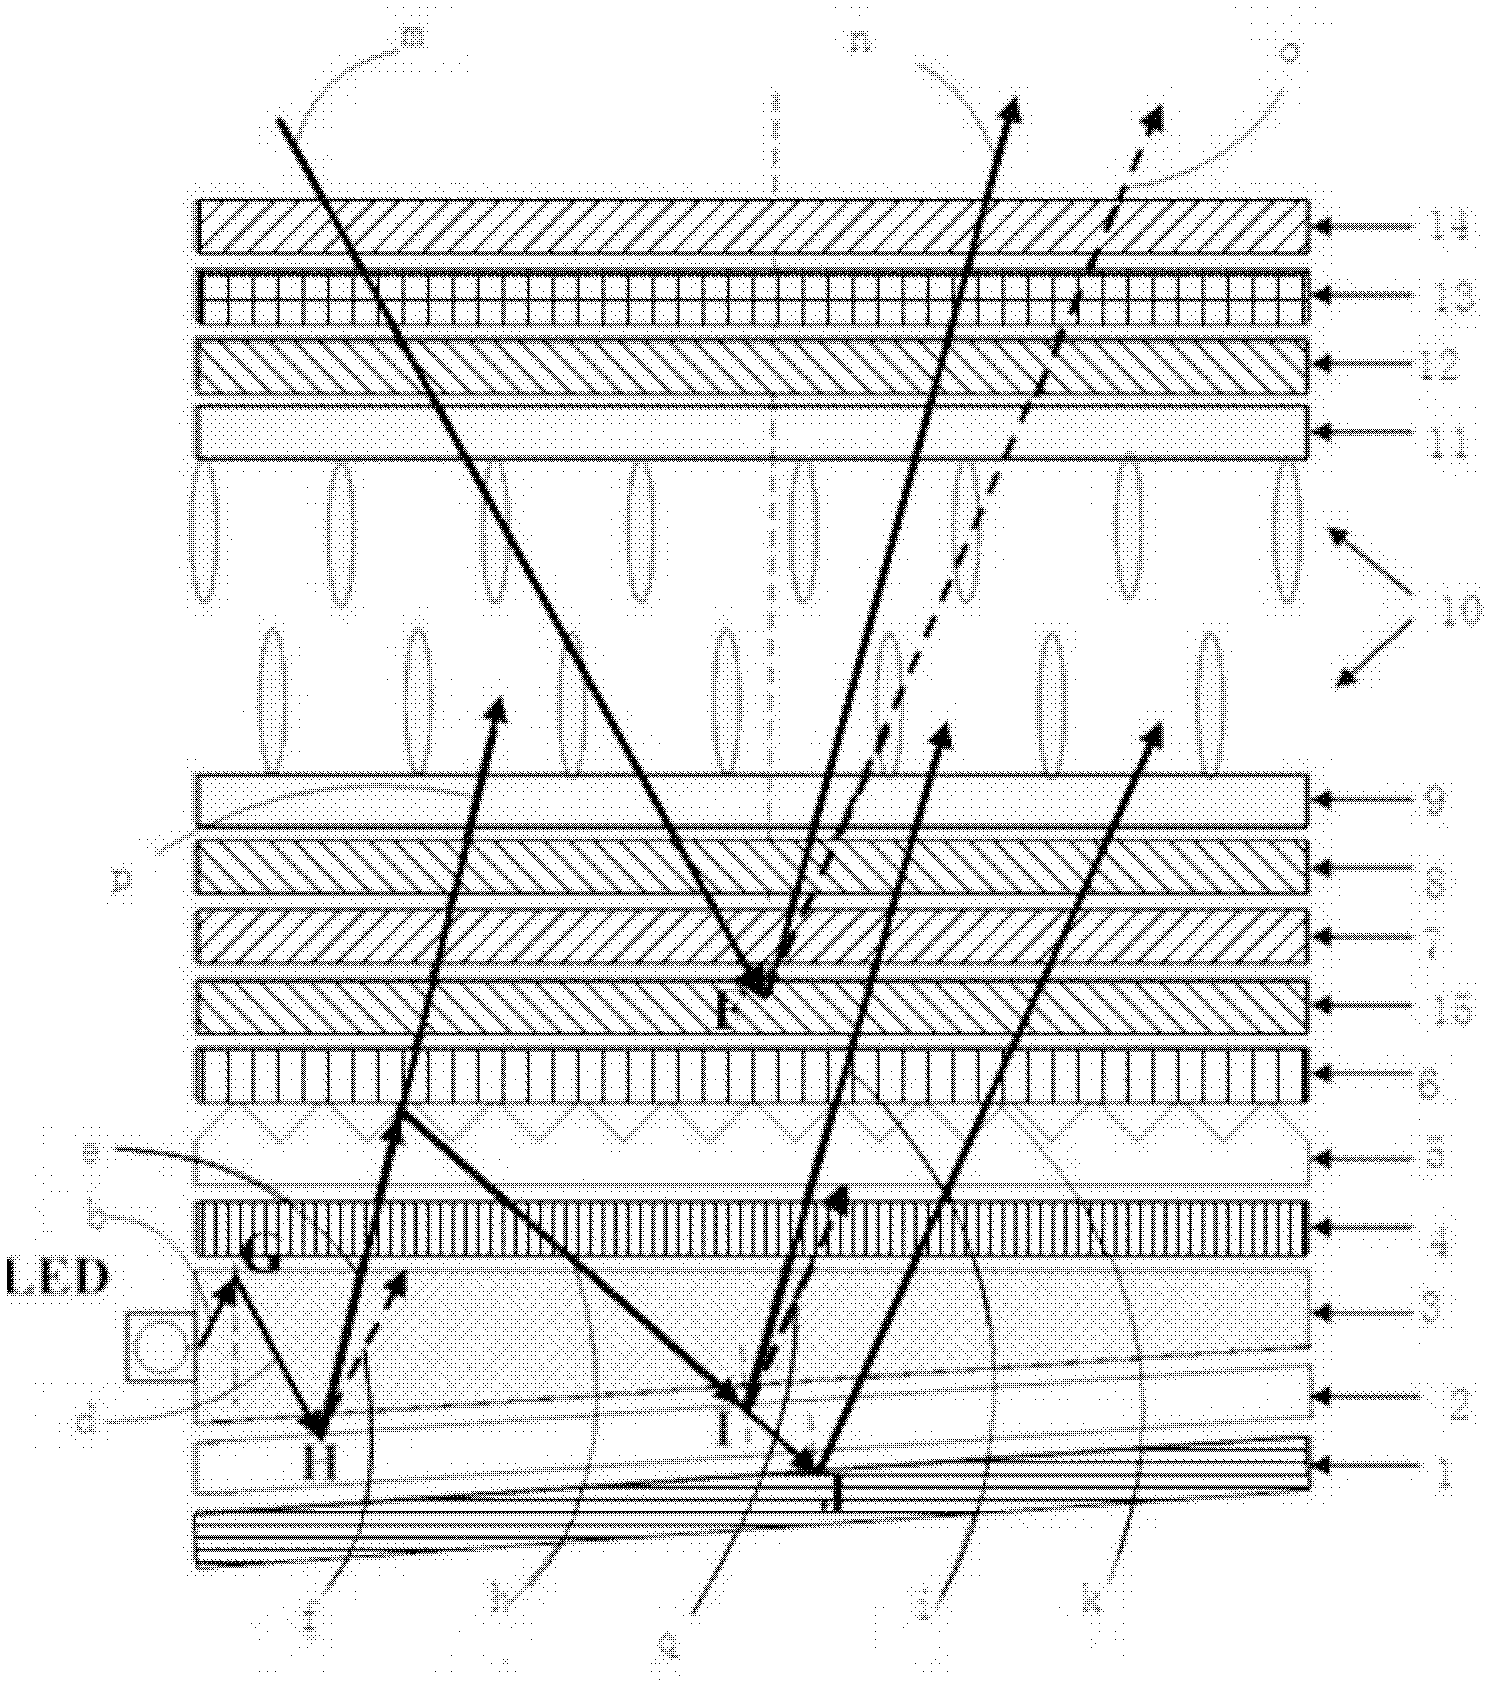 Holographic brightening element and half-reverse half-penetrating type LCD (liquid crystal display) containing same